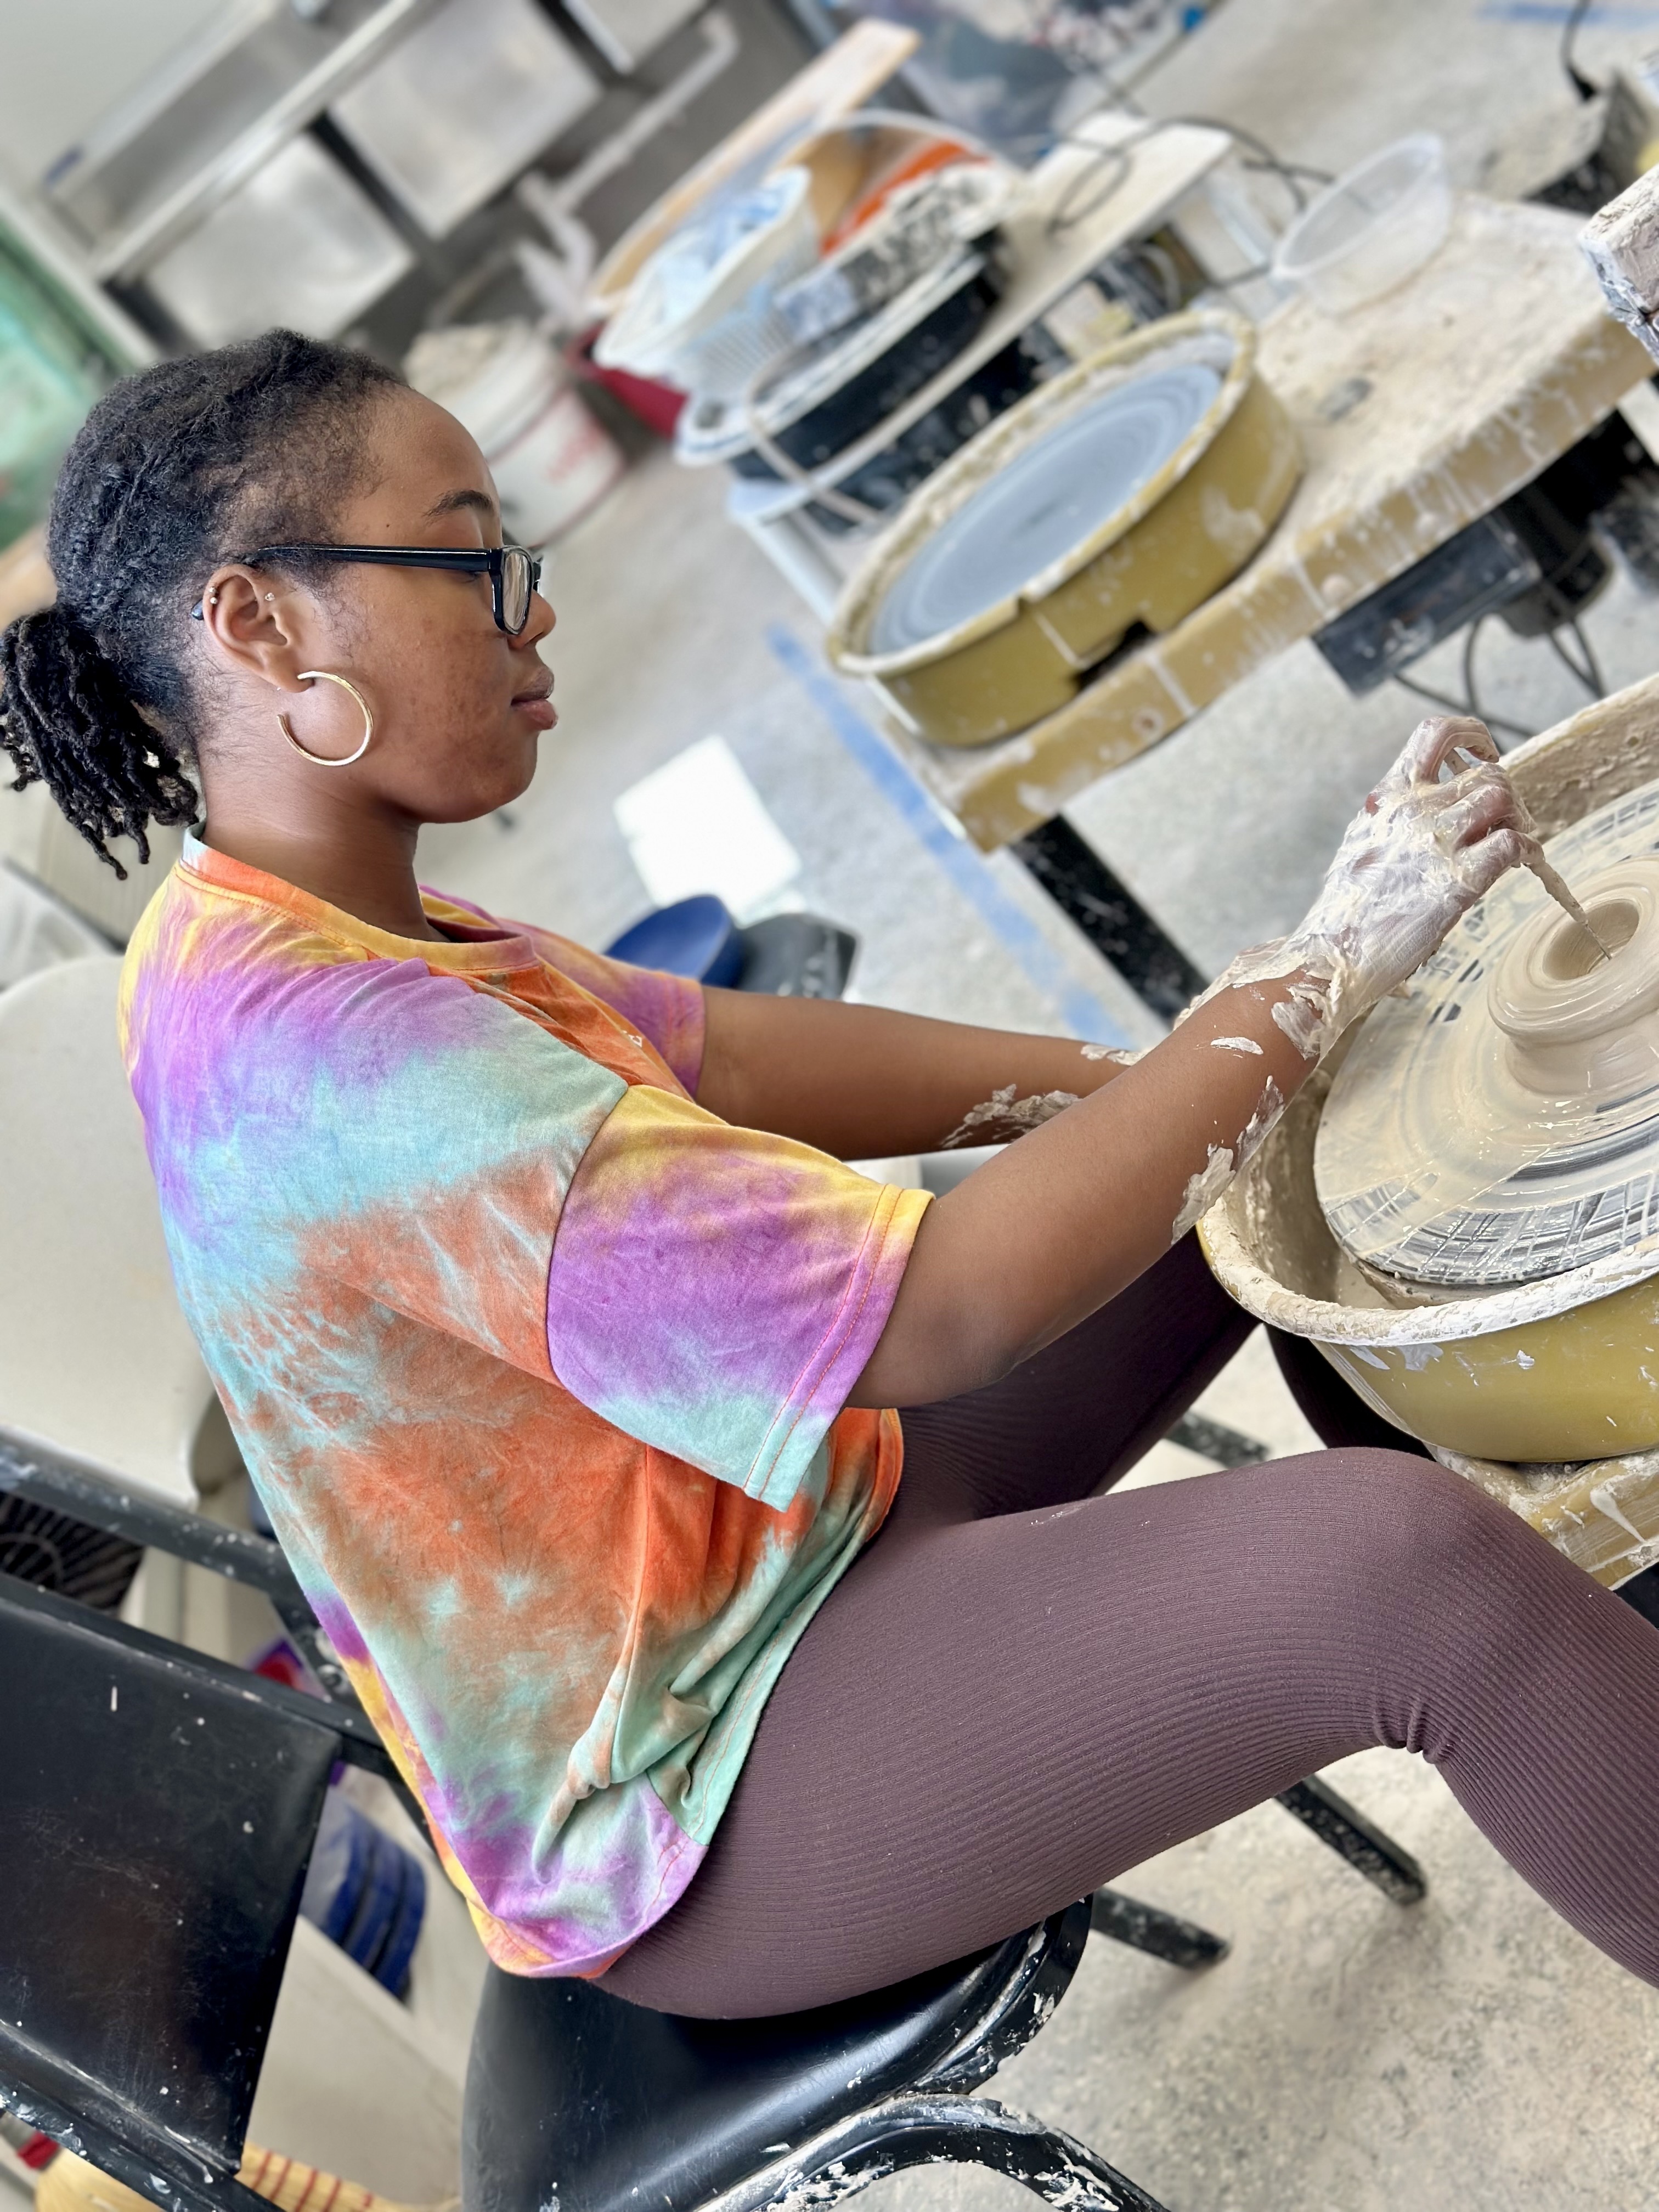 Kaitlin sits at a pottery wheel forming a sculpture